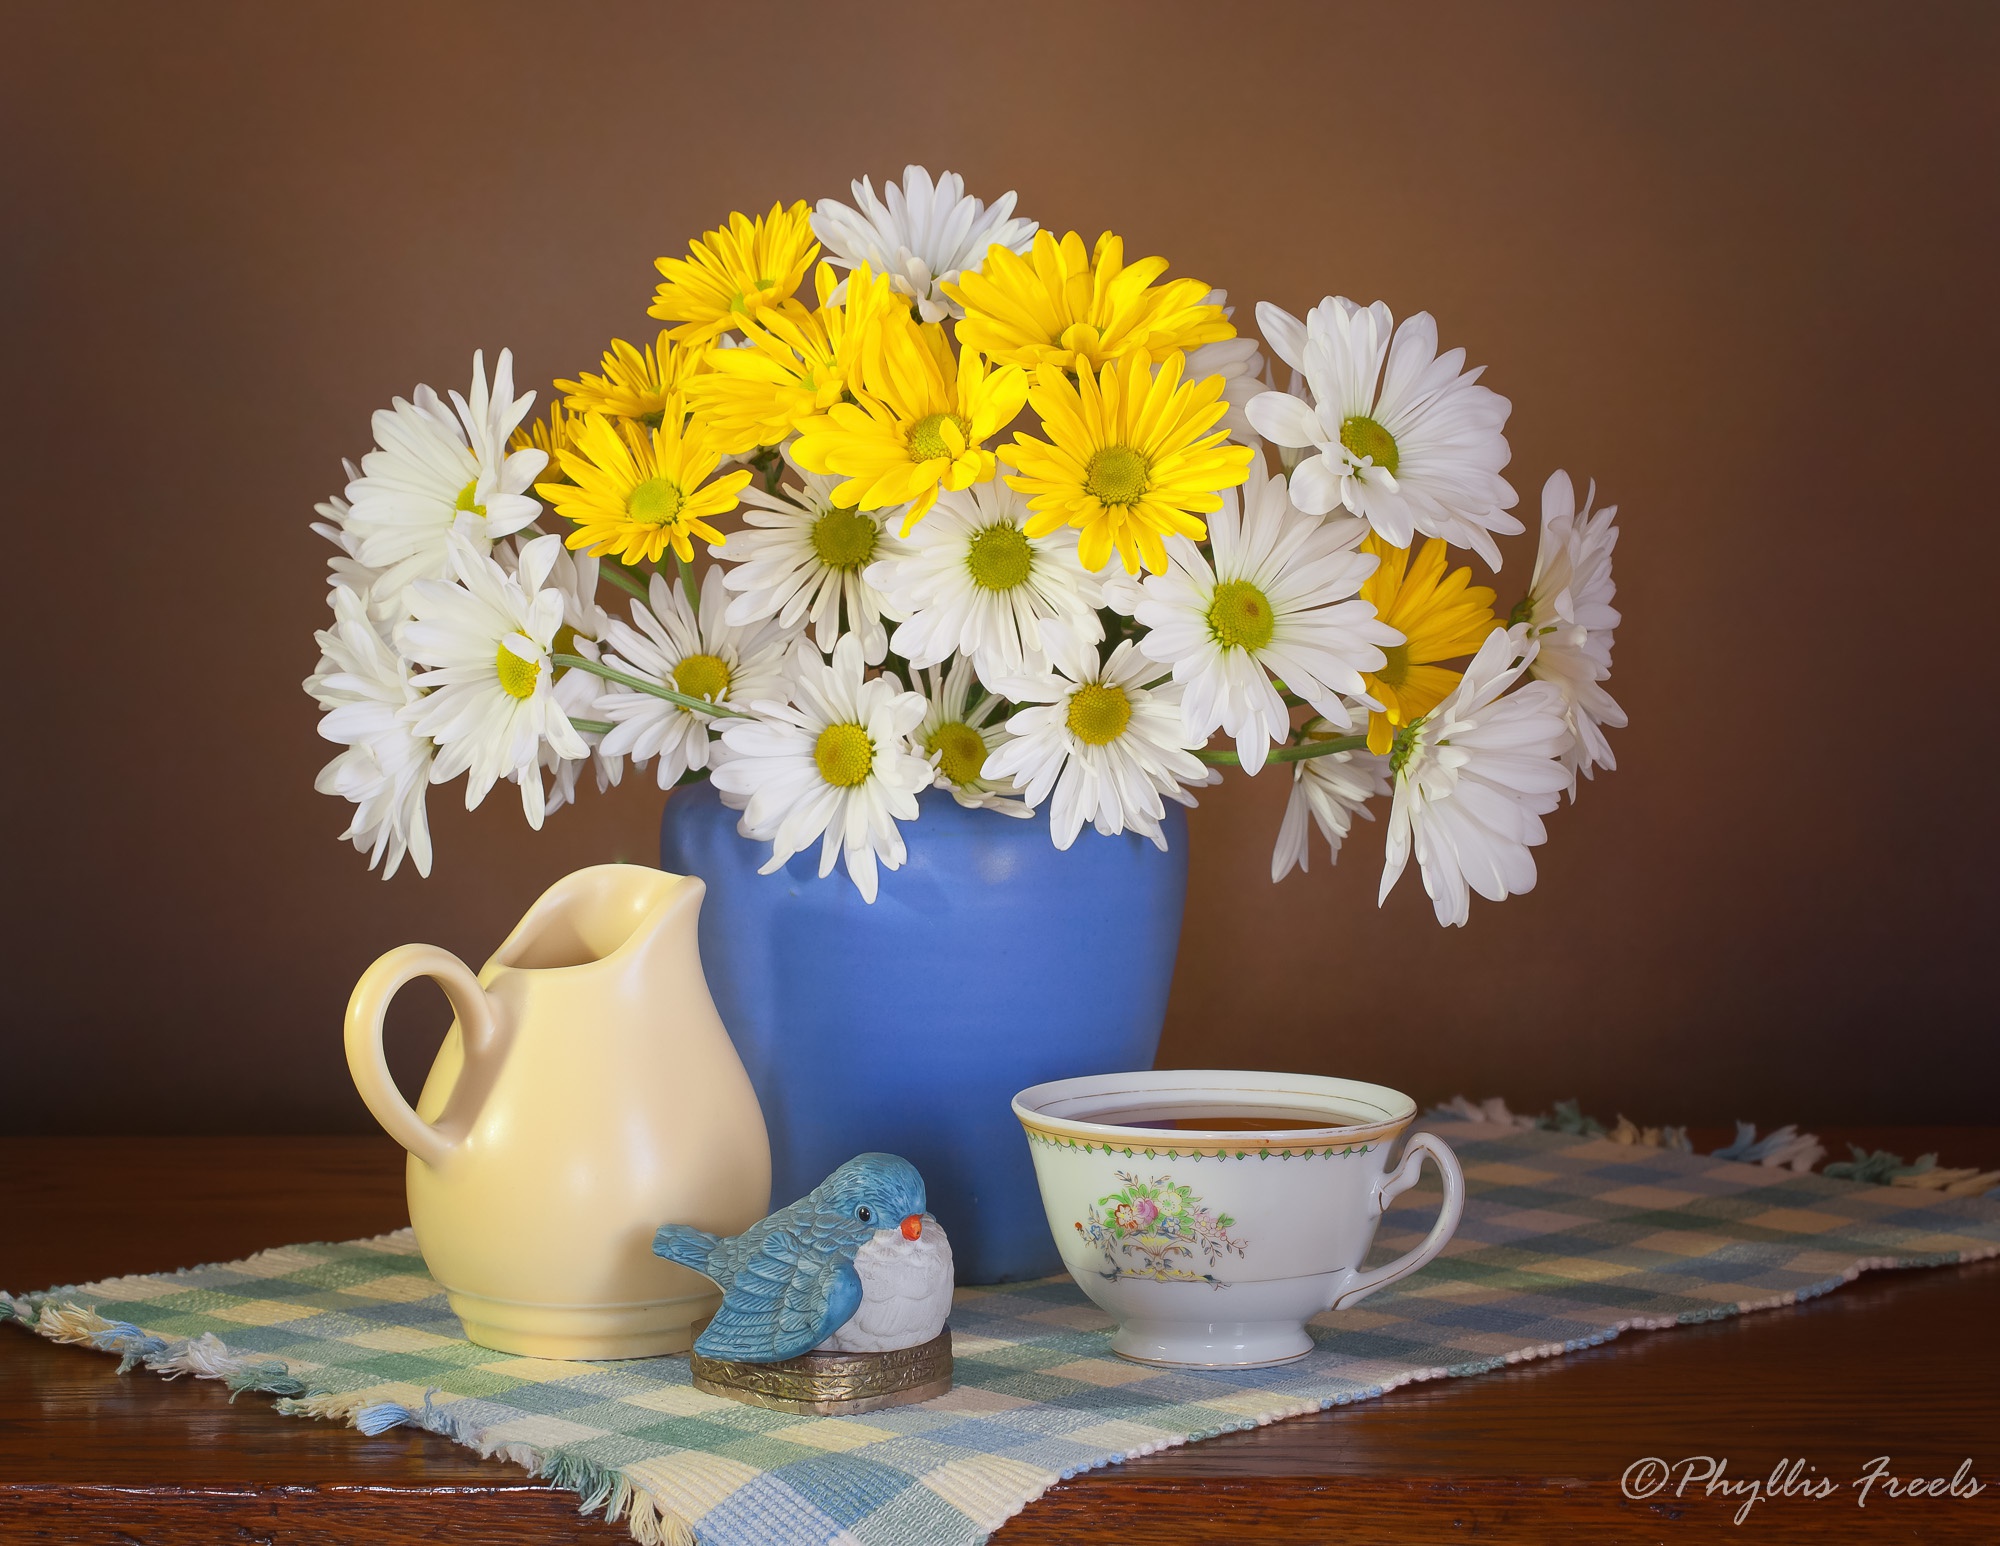 General 2000x1546 still life cup flowers colorful plants